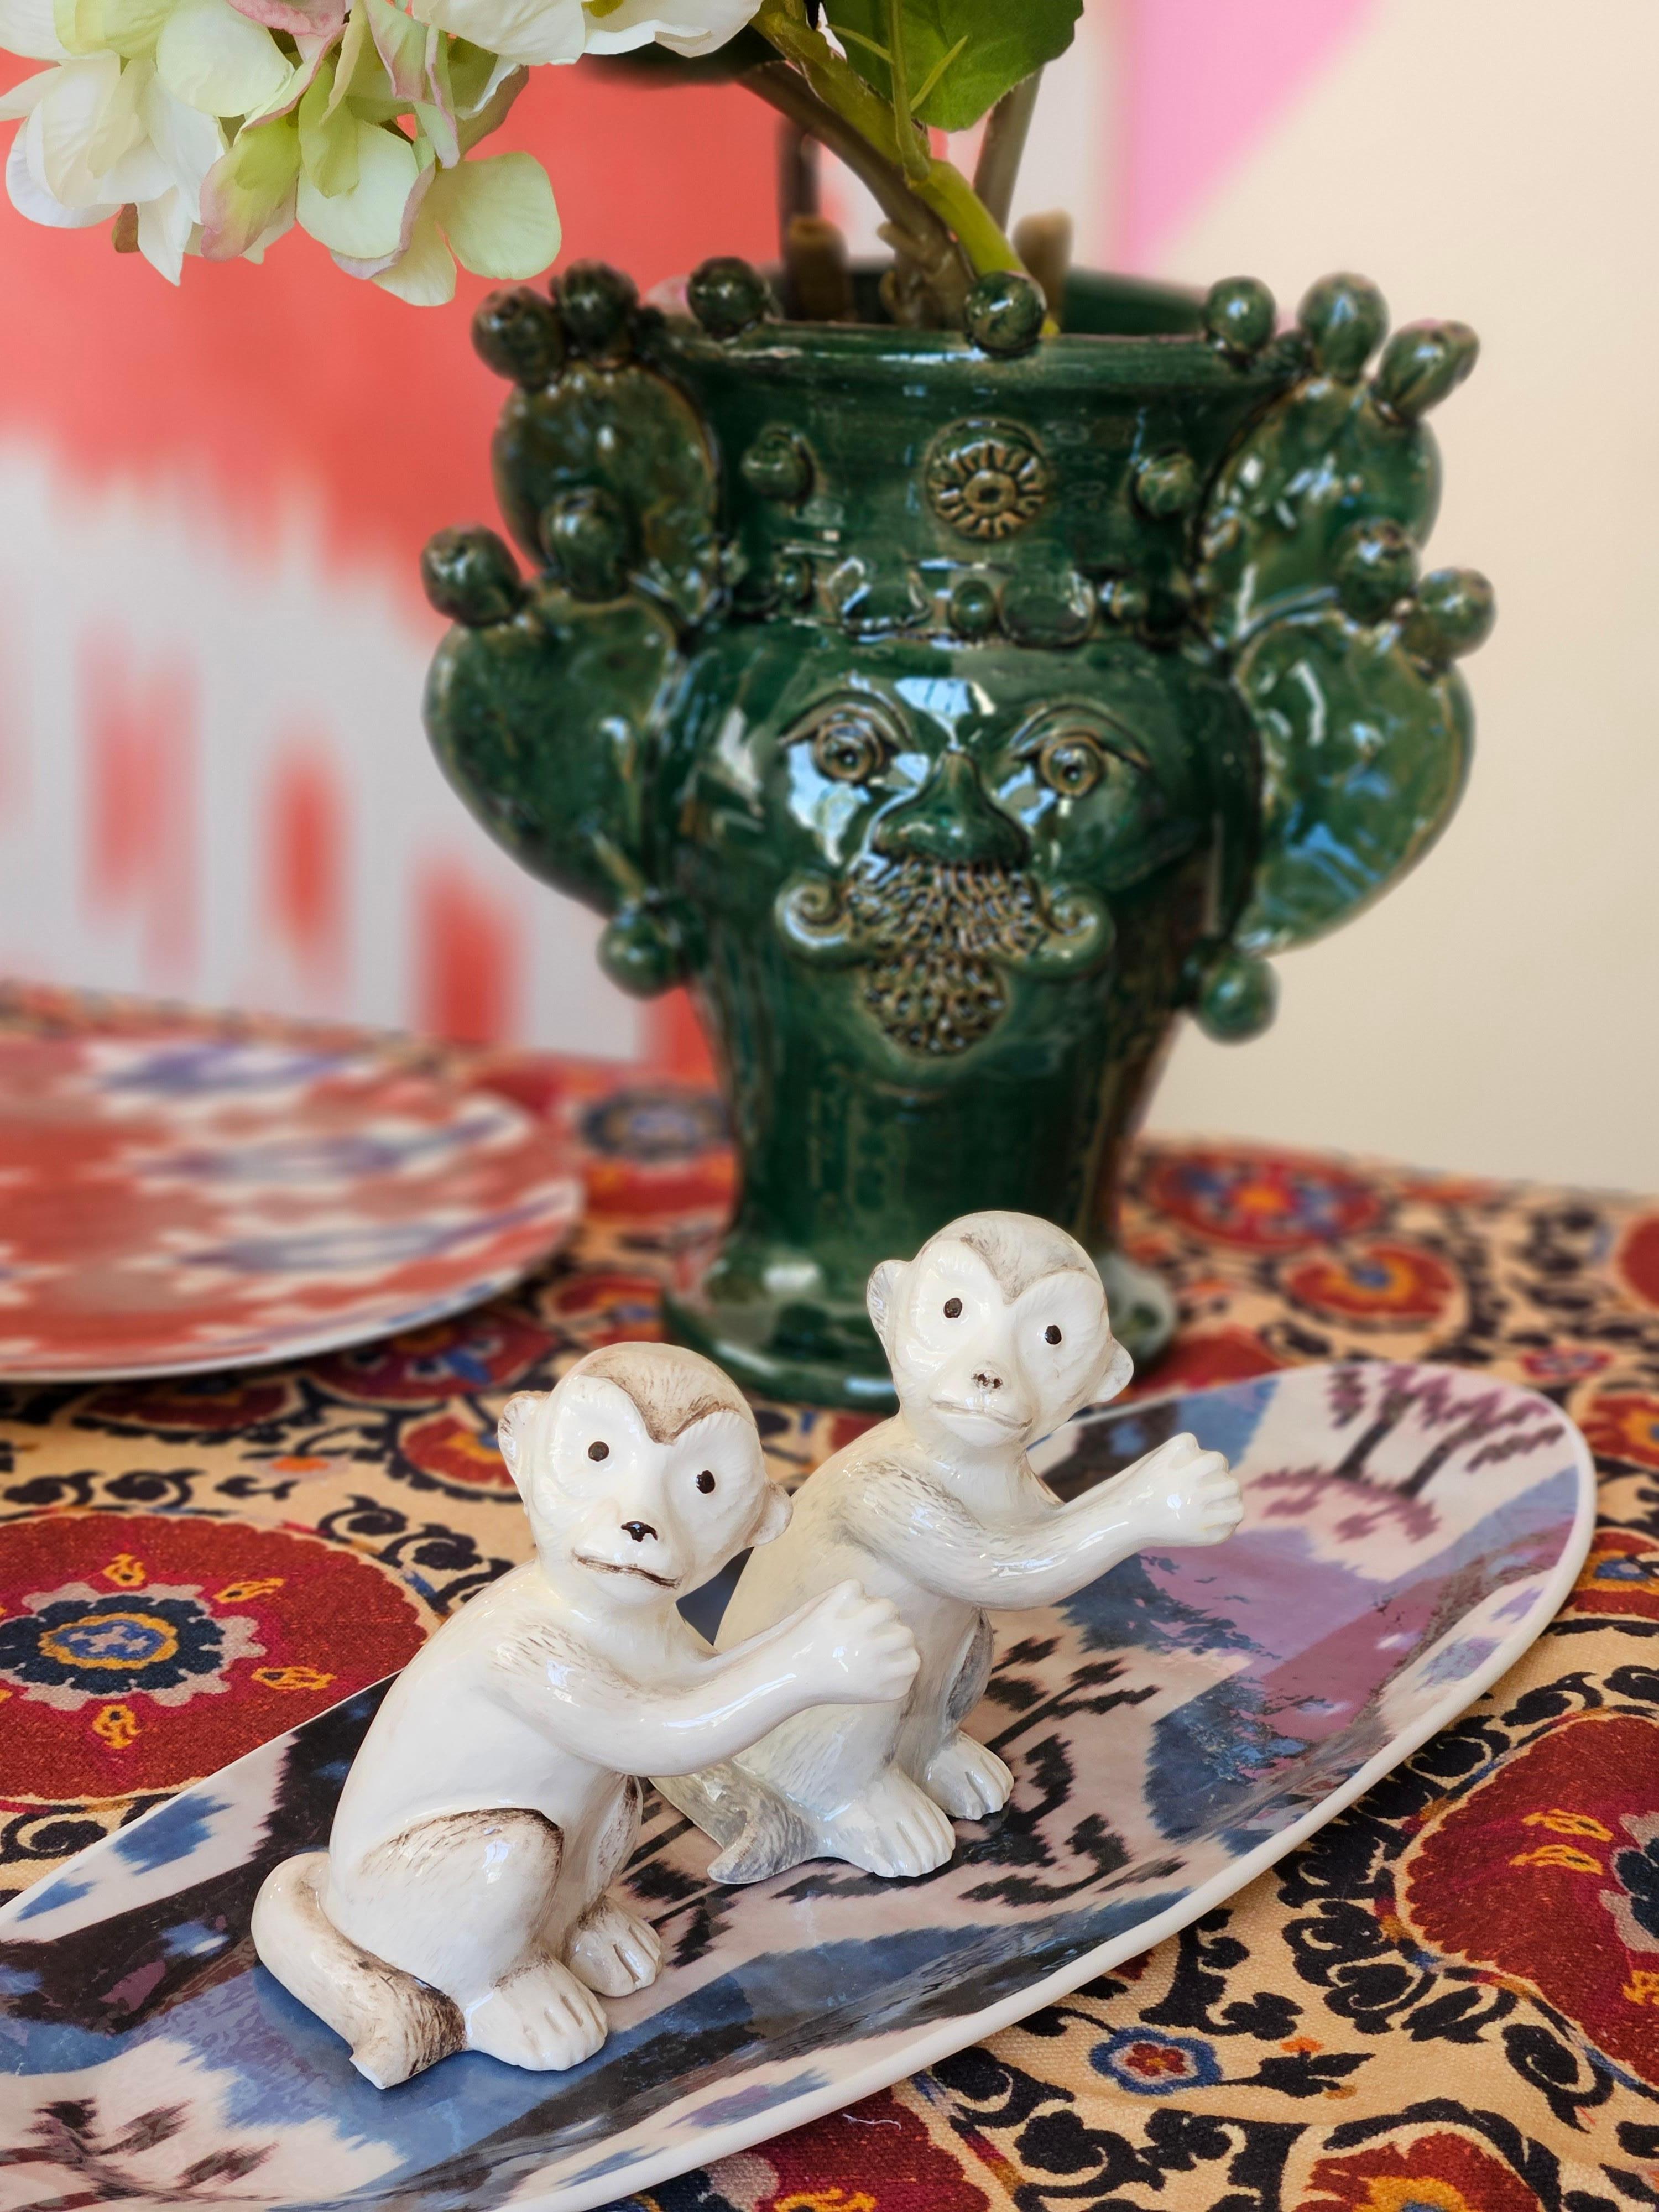 There are few salt&pepper as finky as these ones.
Shaped as monkeys these items are handmade and handpainted in Italy.